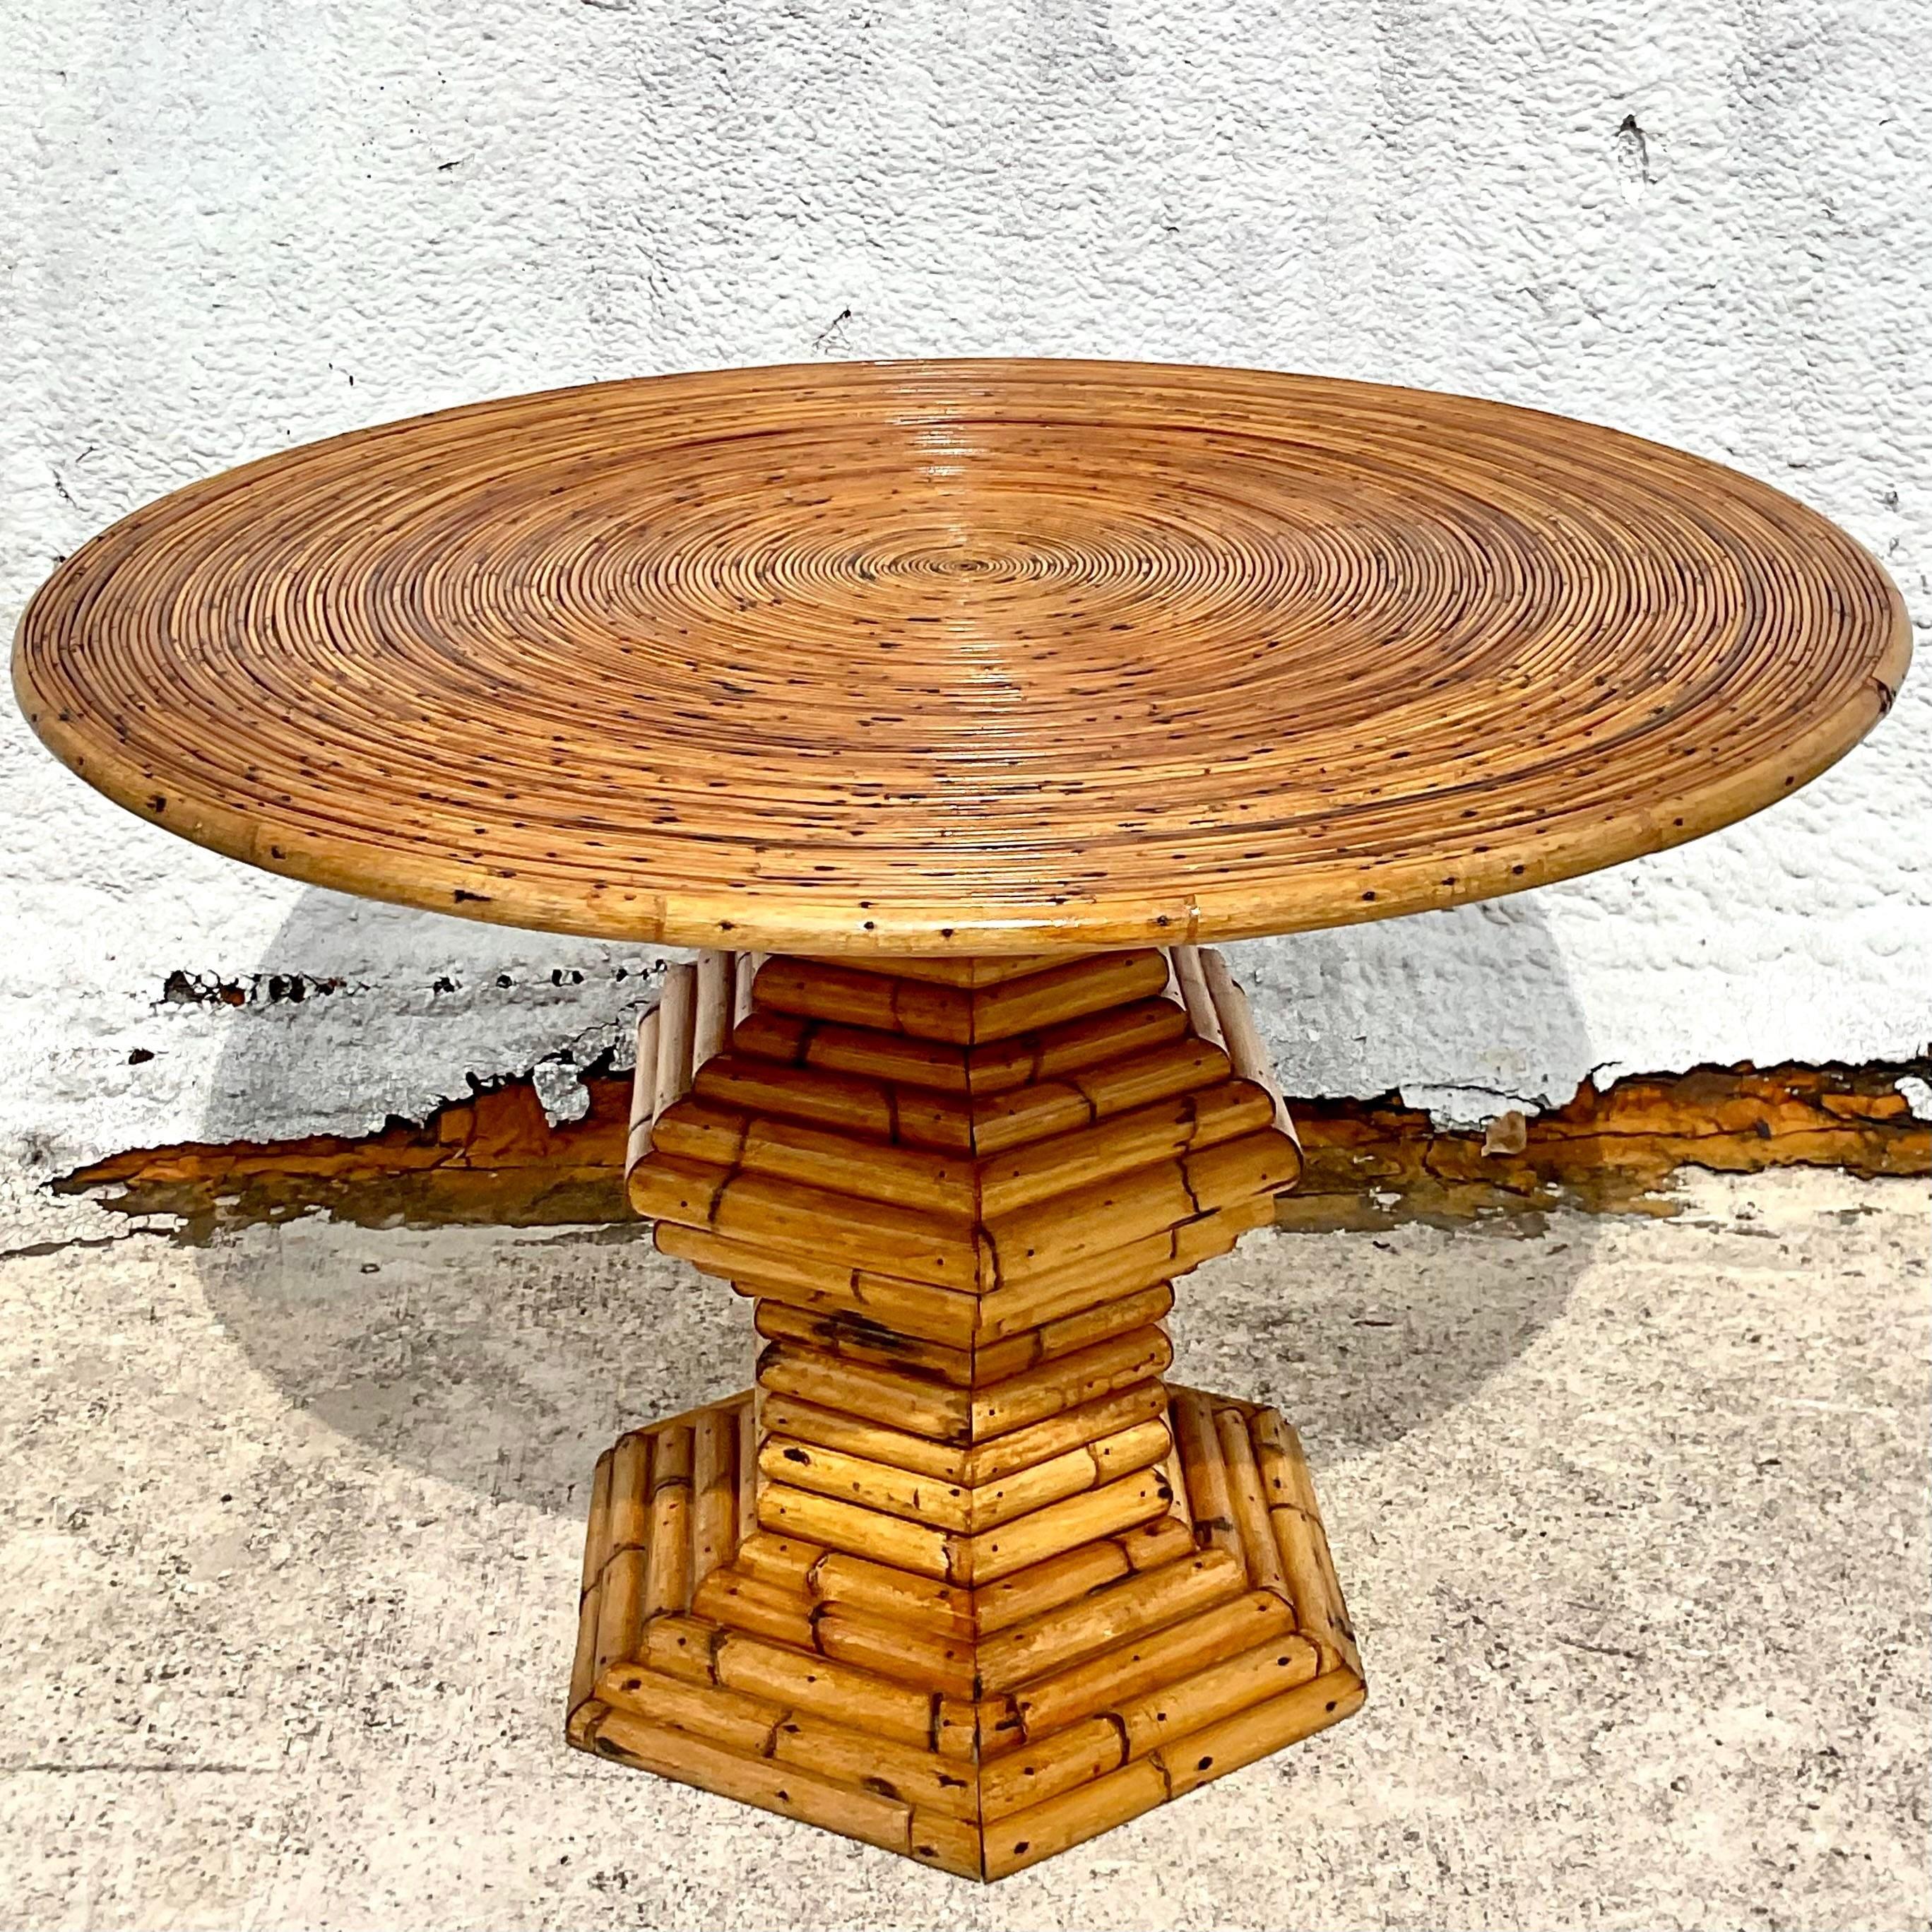 An extraordinary vintage Coastal dining table. A chic coiled pencil reed top that rests on a bamboo angled pedestal. A super special piece. Acquired from a Palm Beach estate.